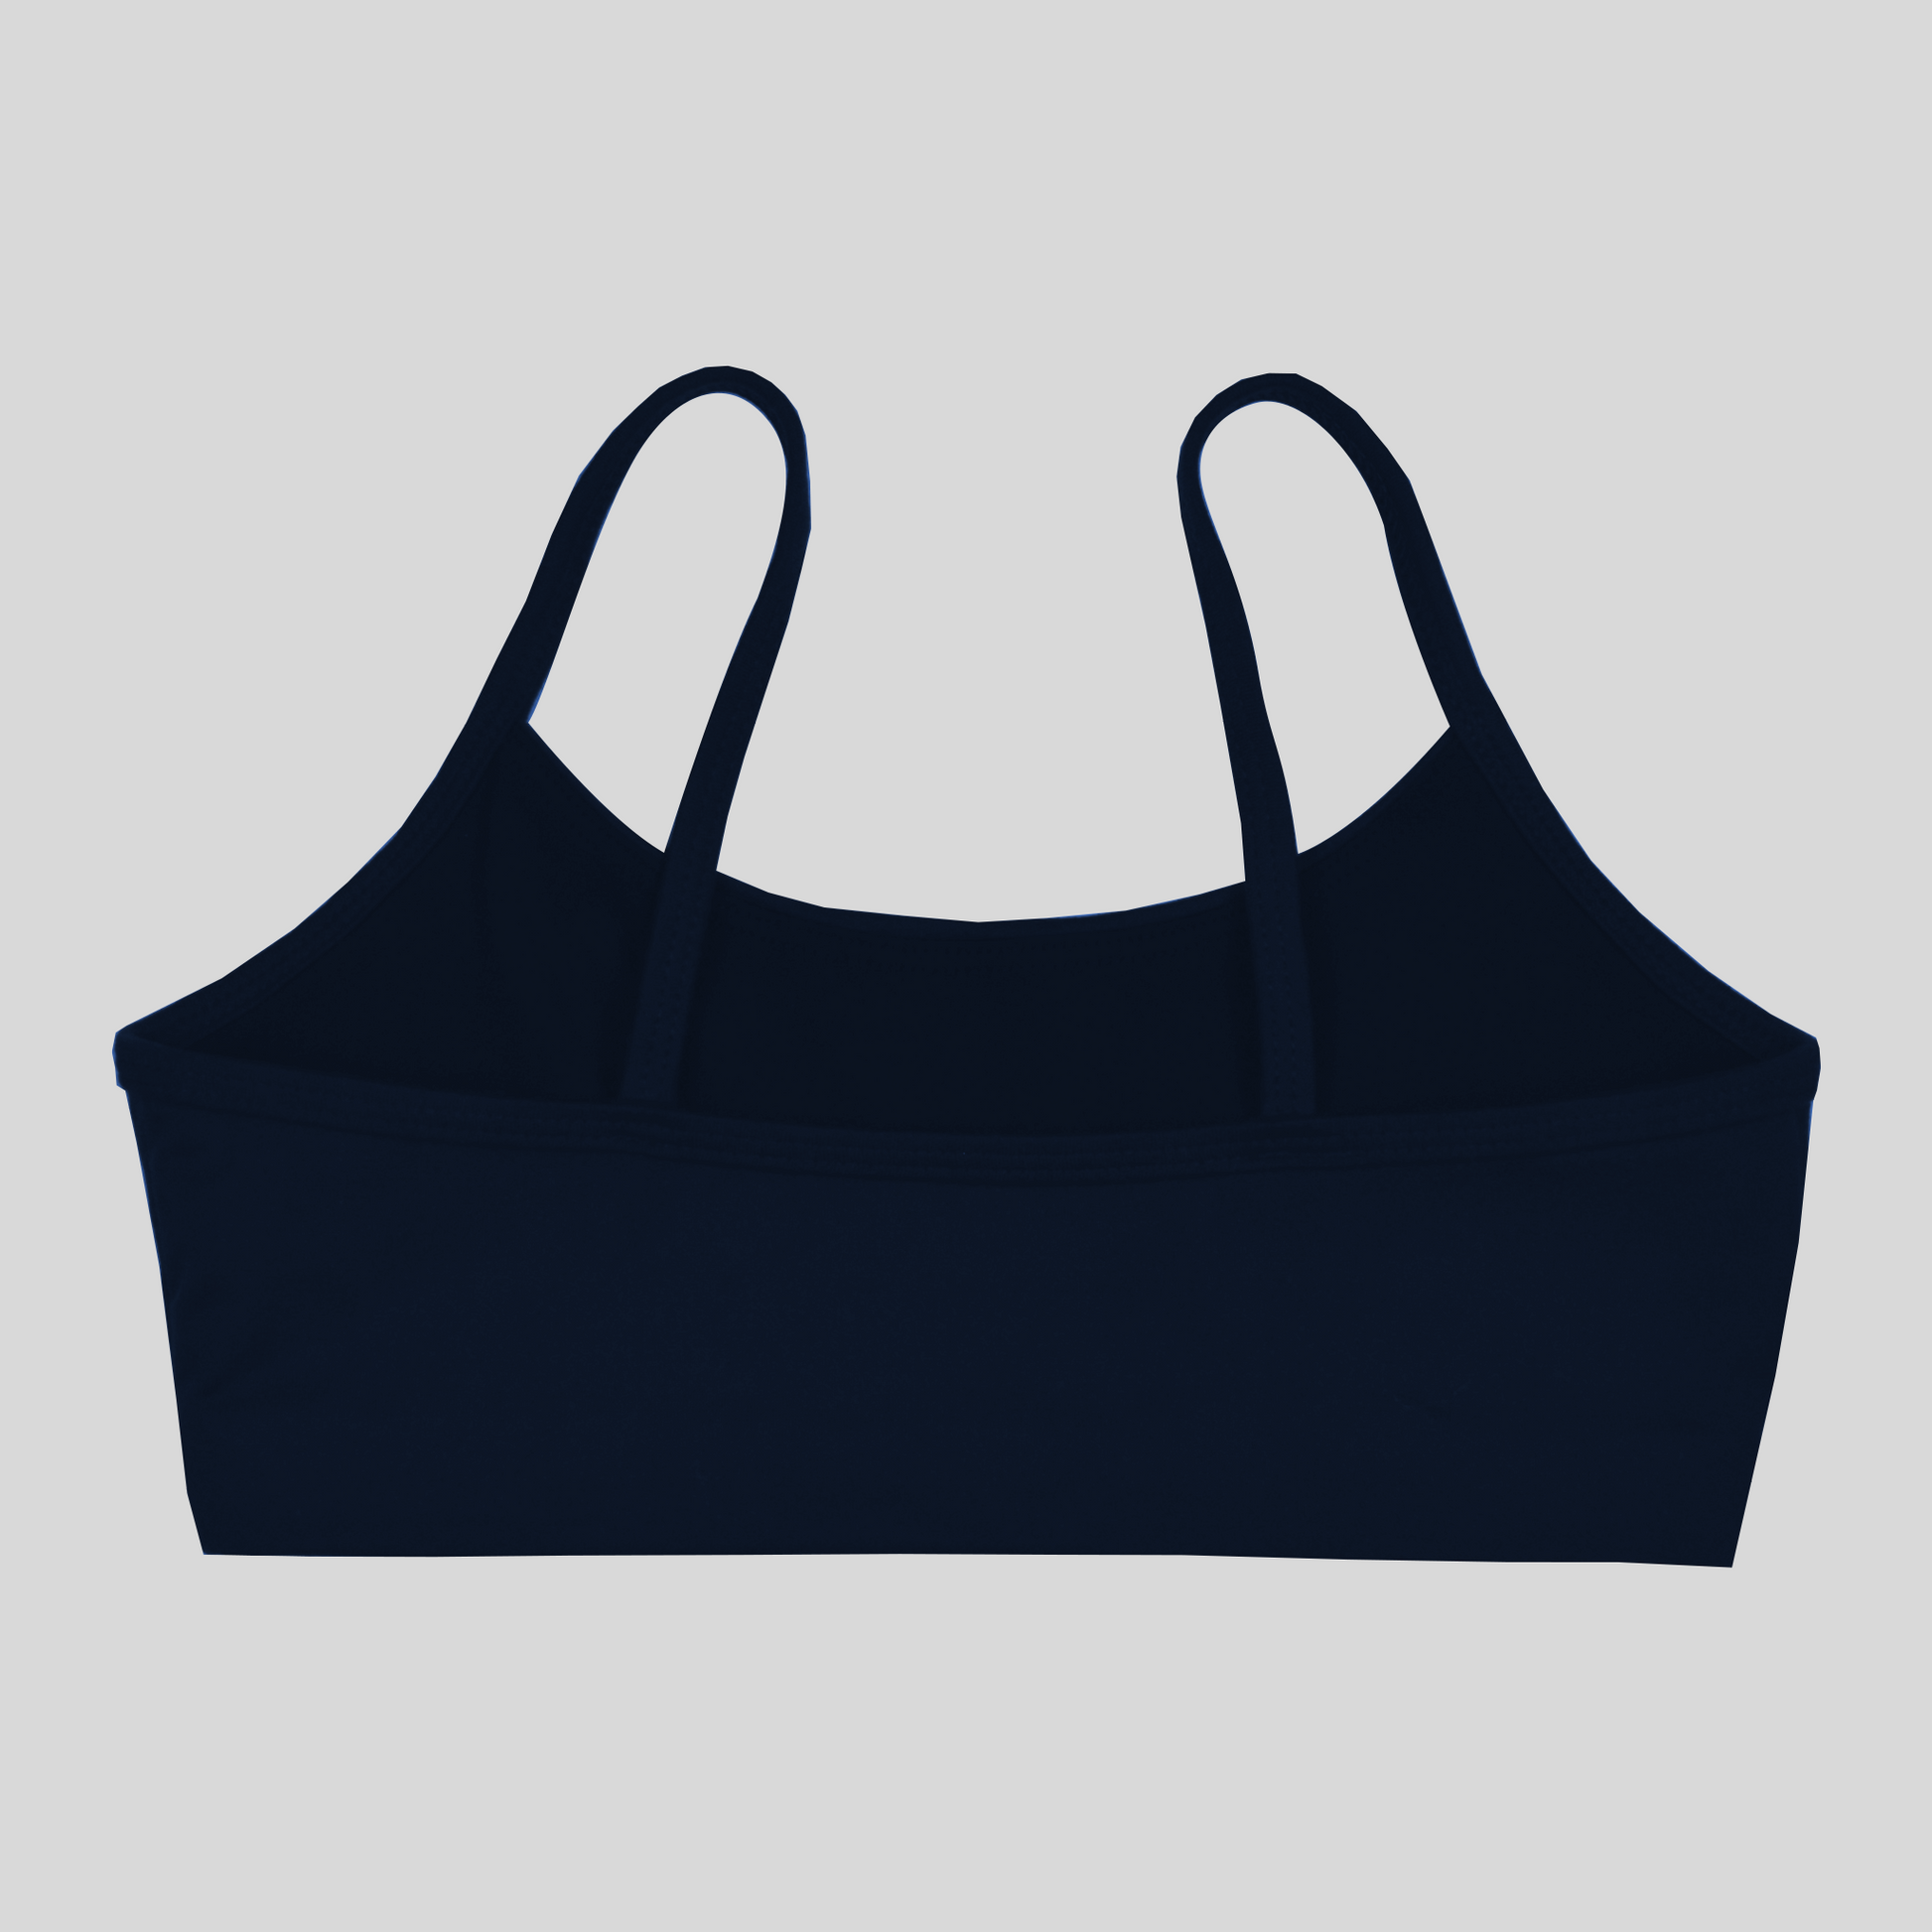 Shop by Type - Bras